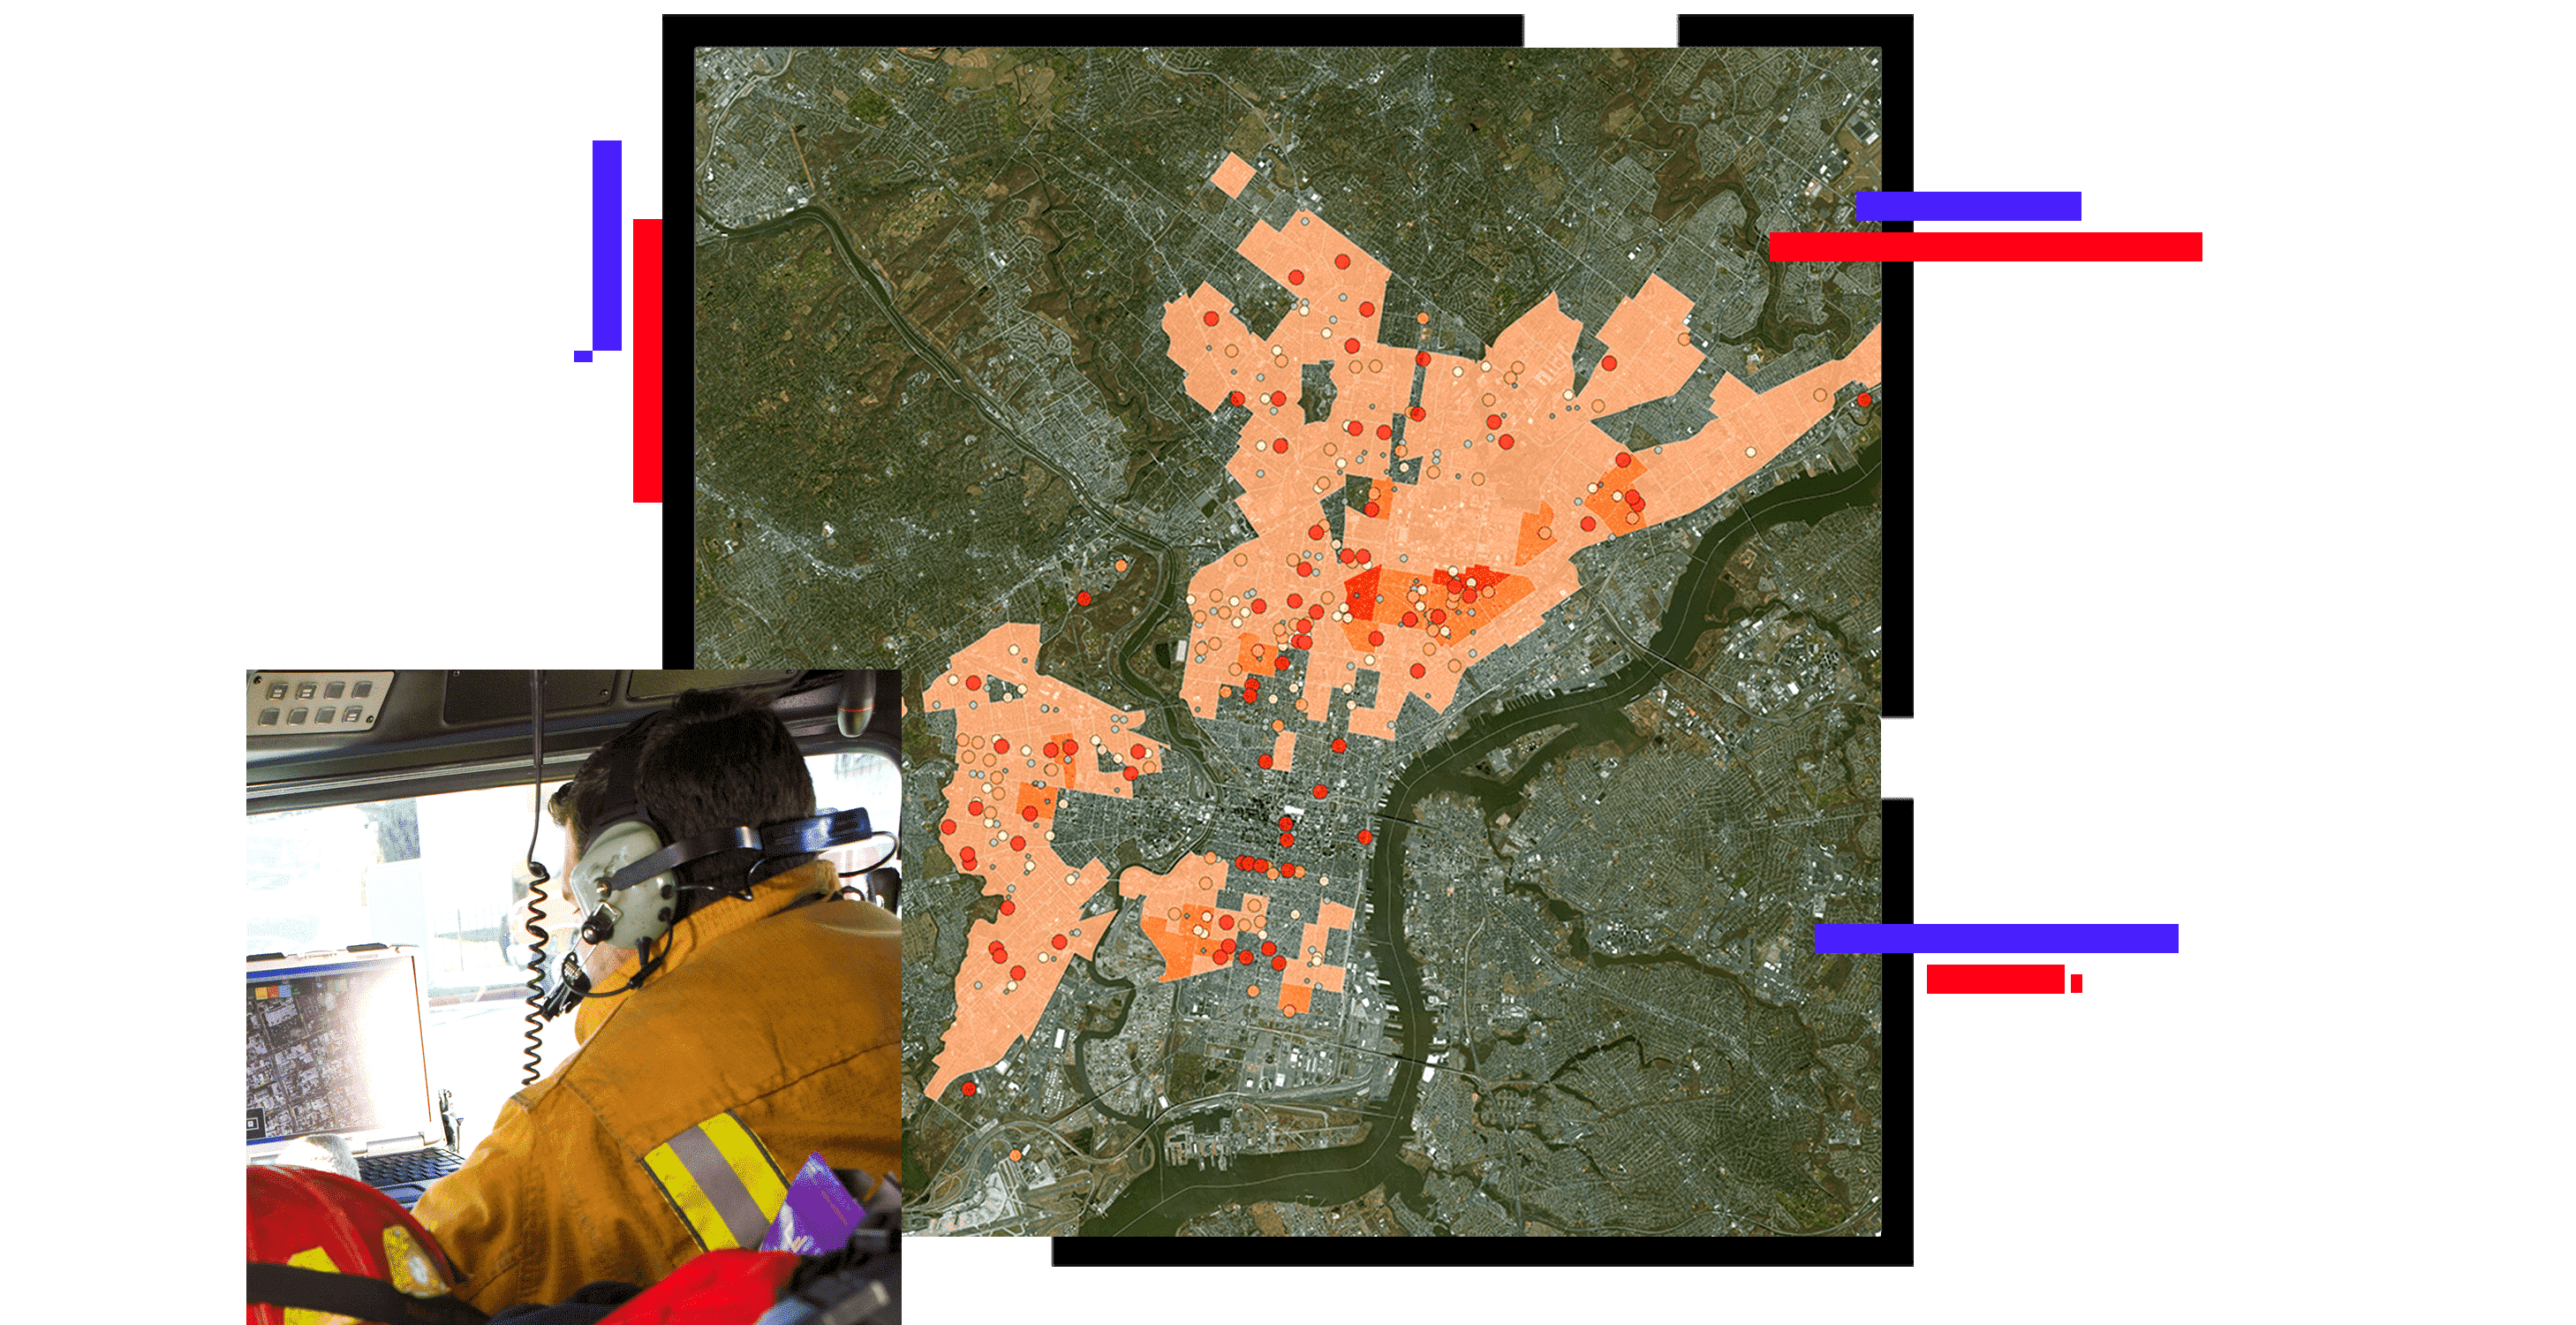 A contour map of a wooded area with sections shaded in gradients of orange, overlaid with a photo of fire personnel driving a fire truck while using a headset